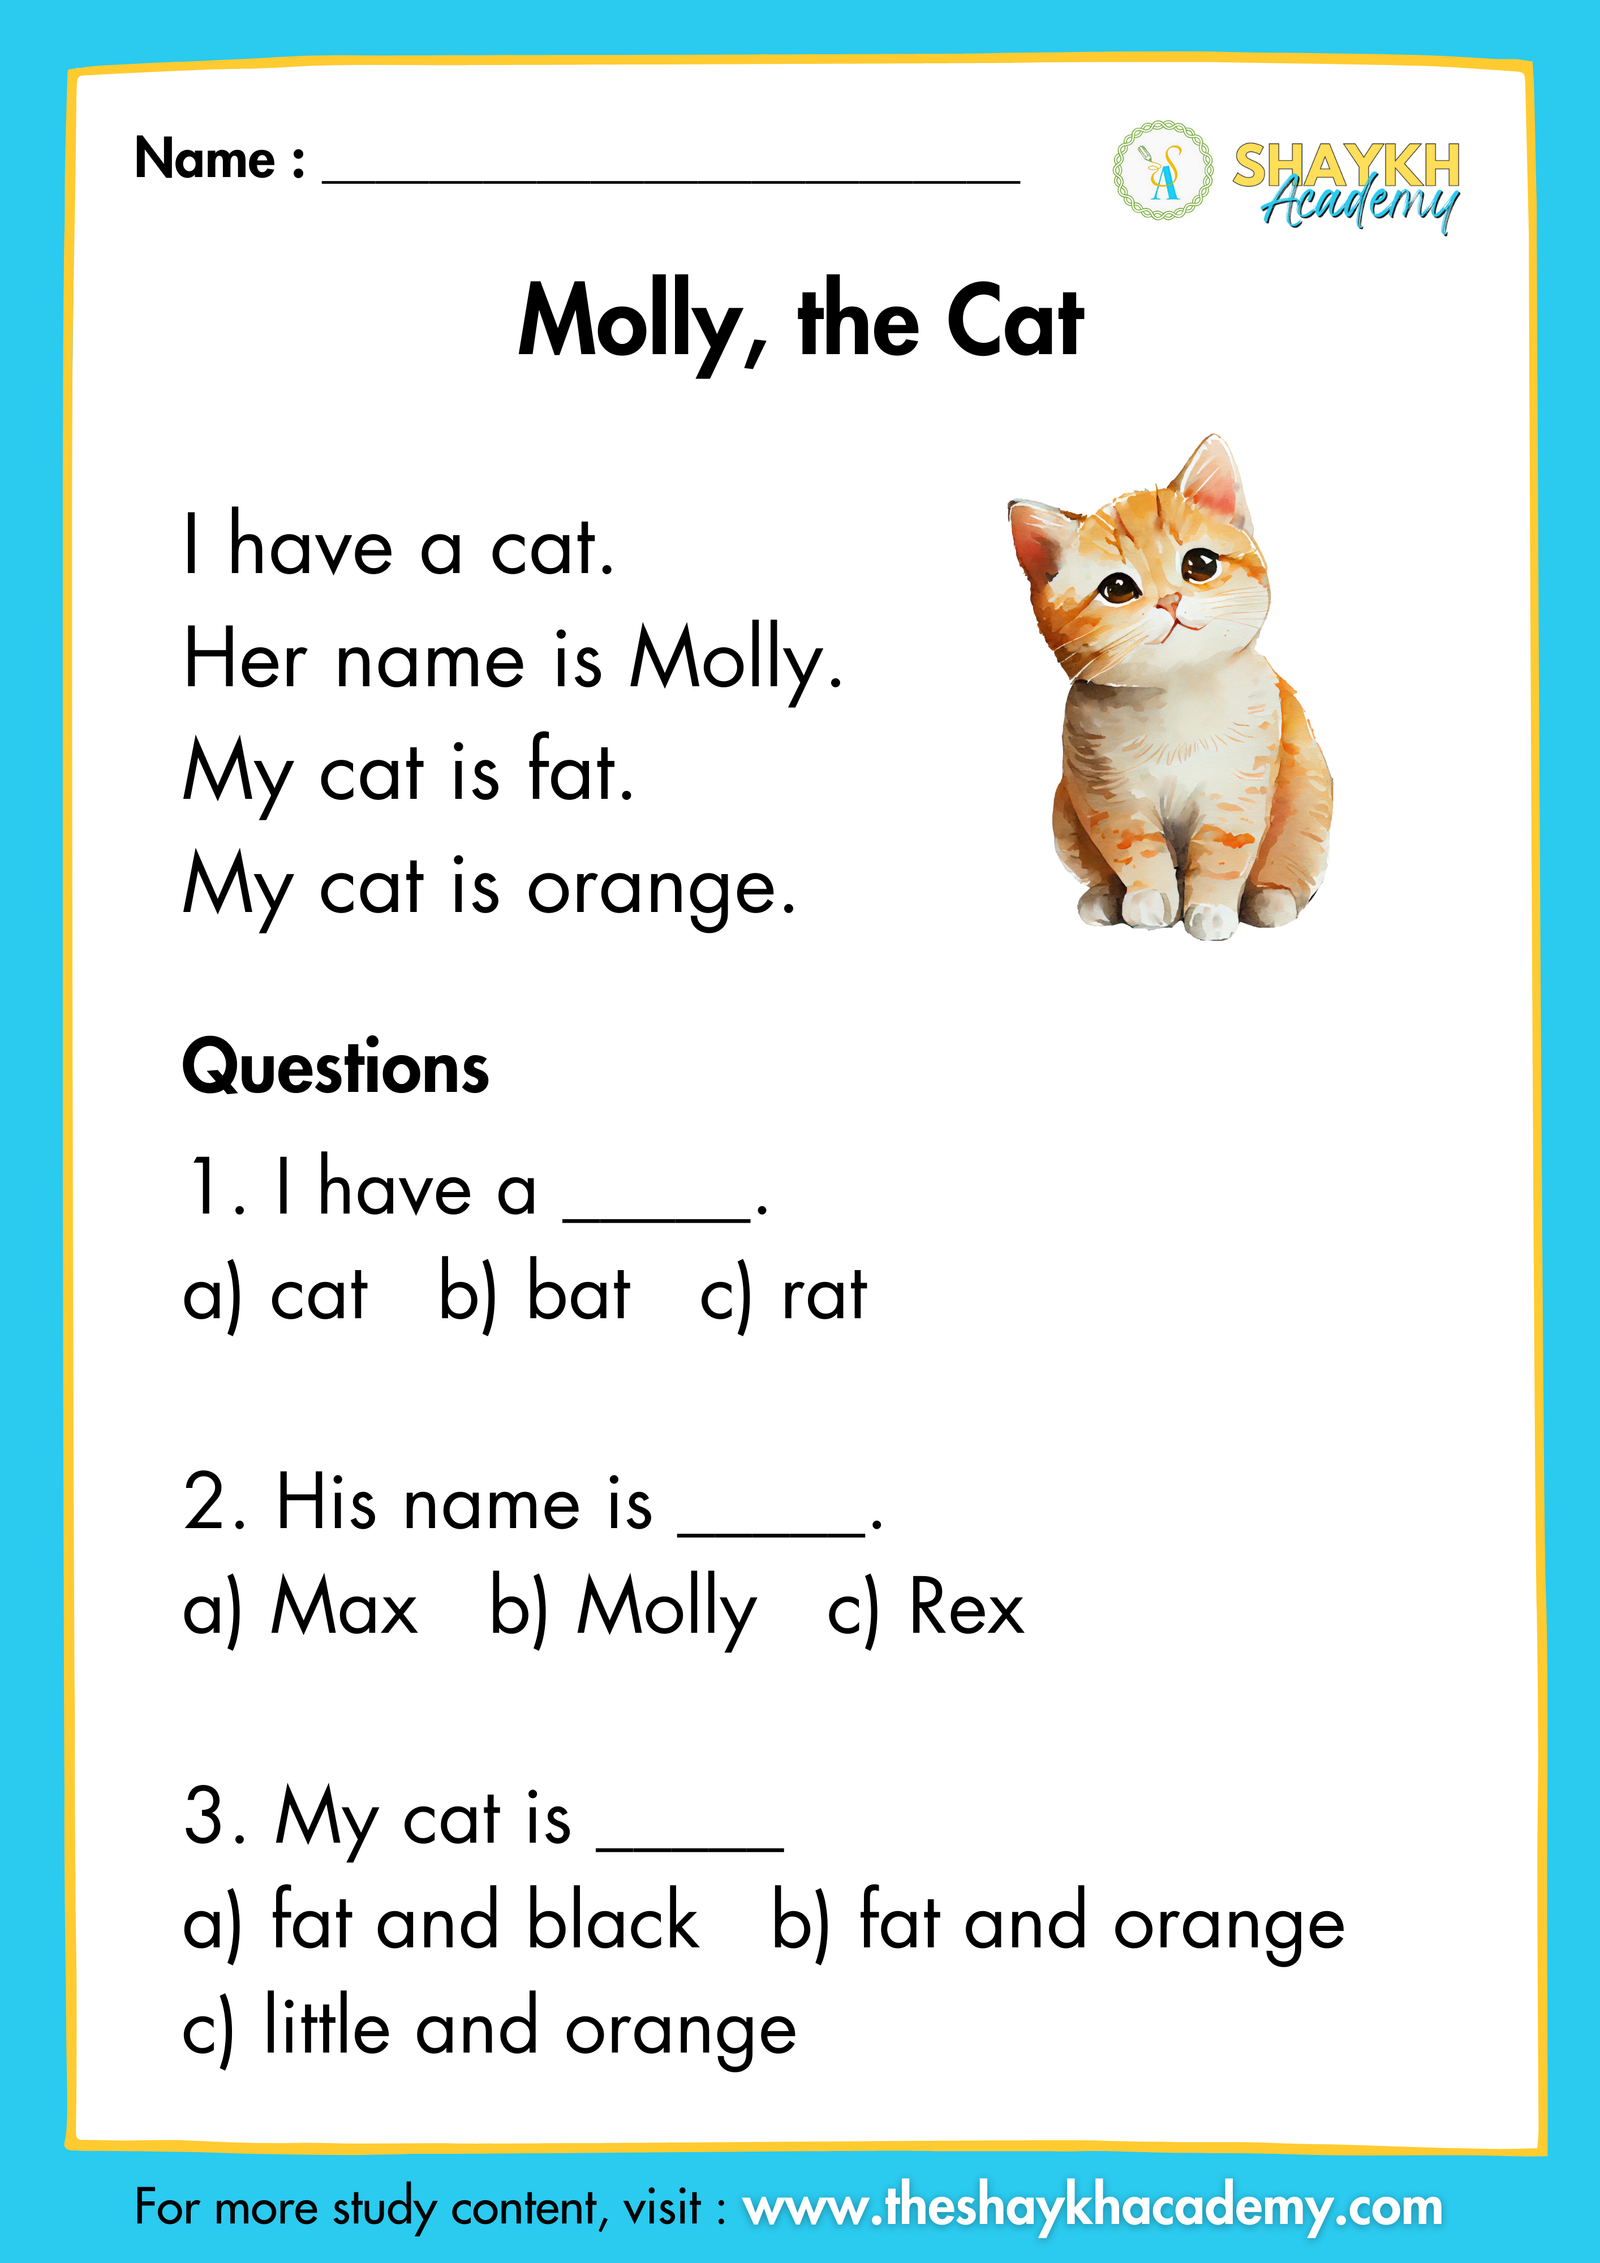 Molly the Cat